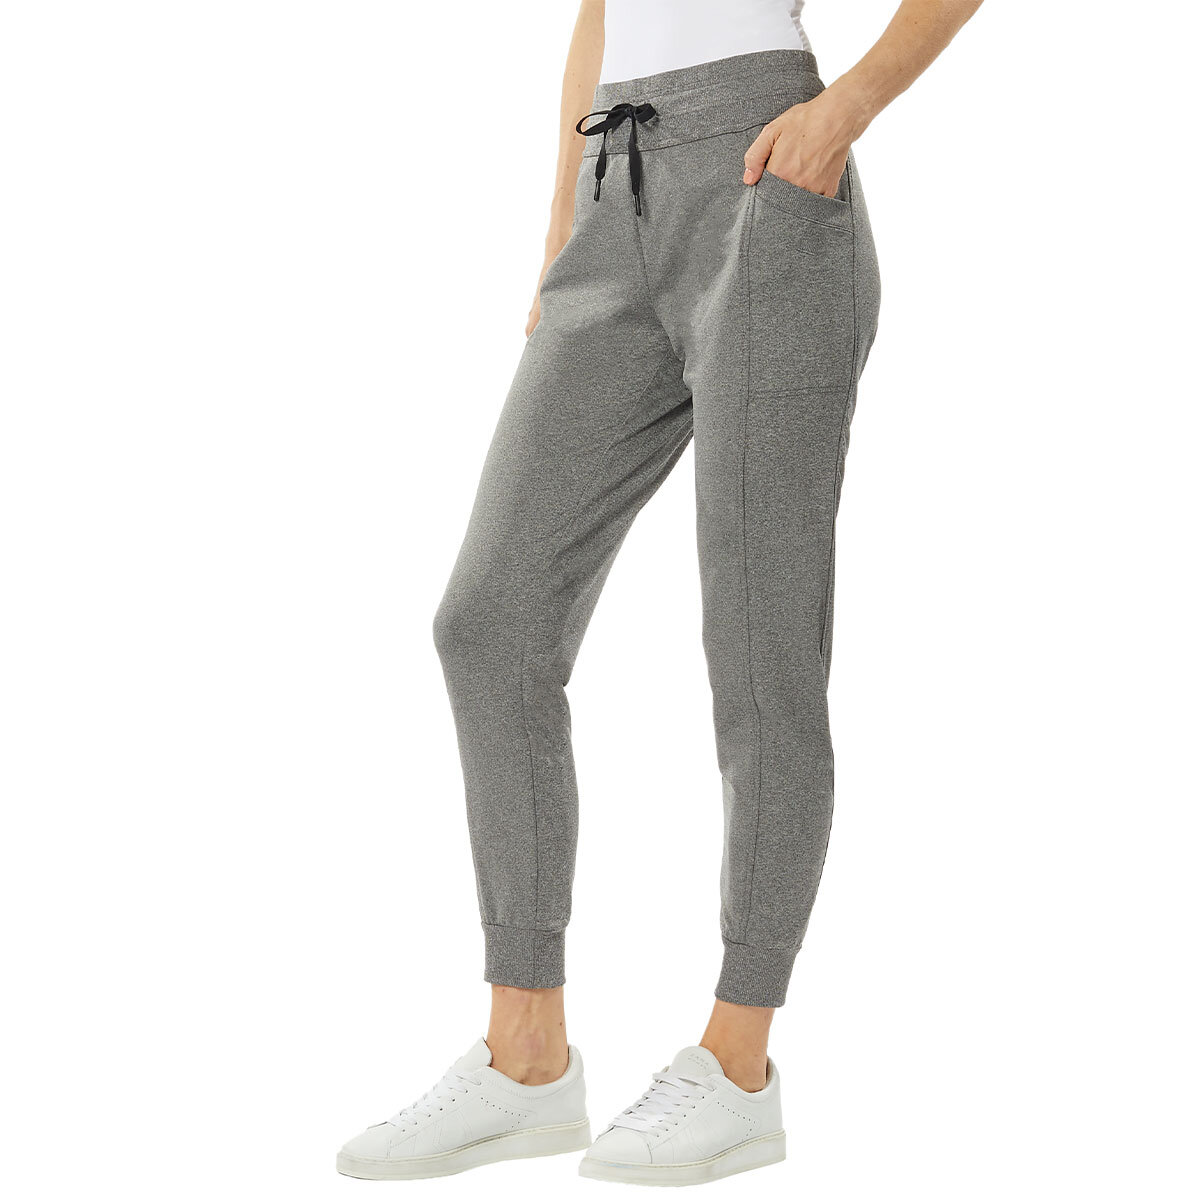  32 DEGREES Cool Womens 2 Pack Soft Sleep Pant (Heather